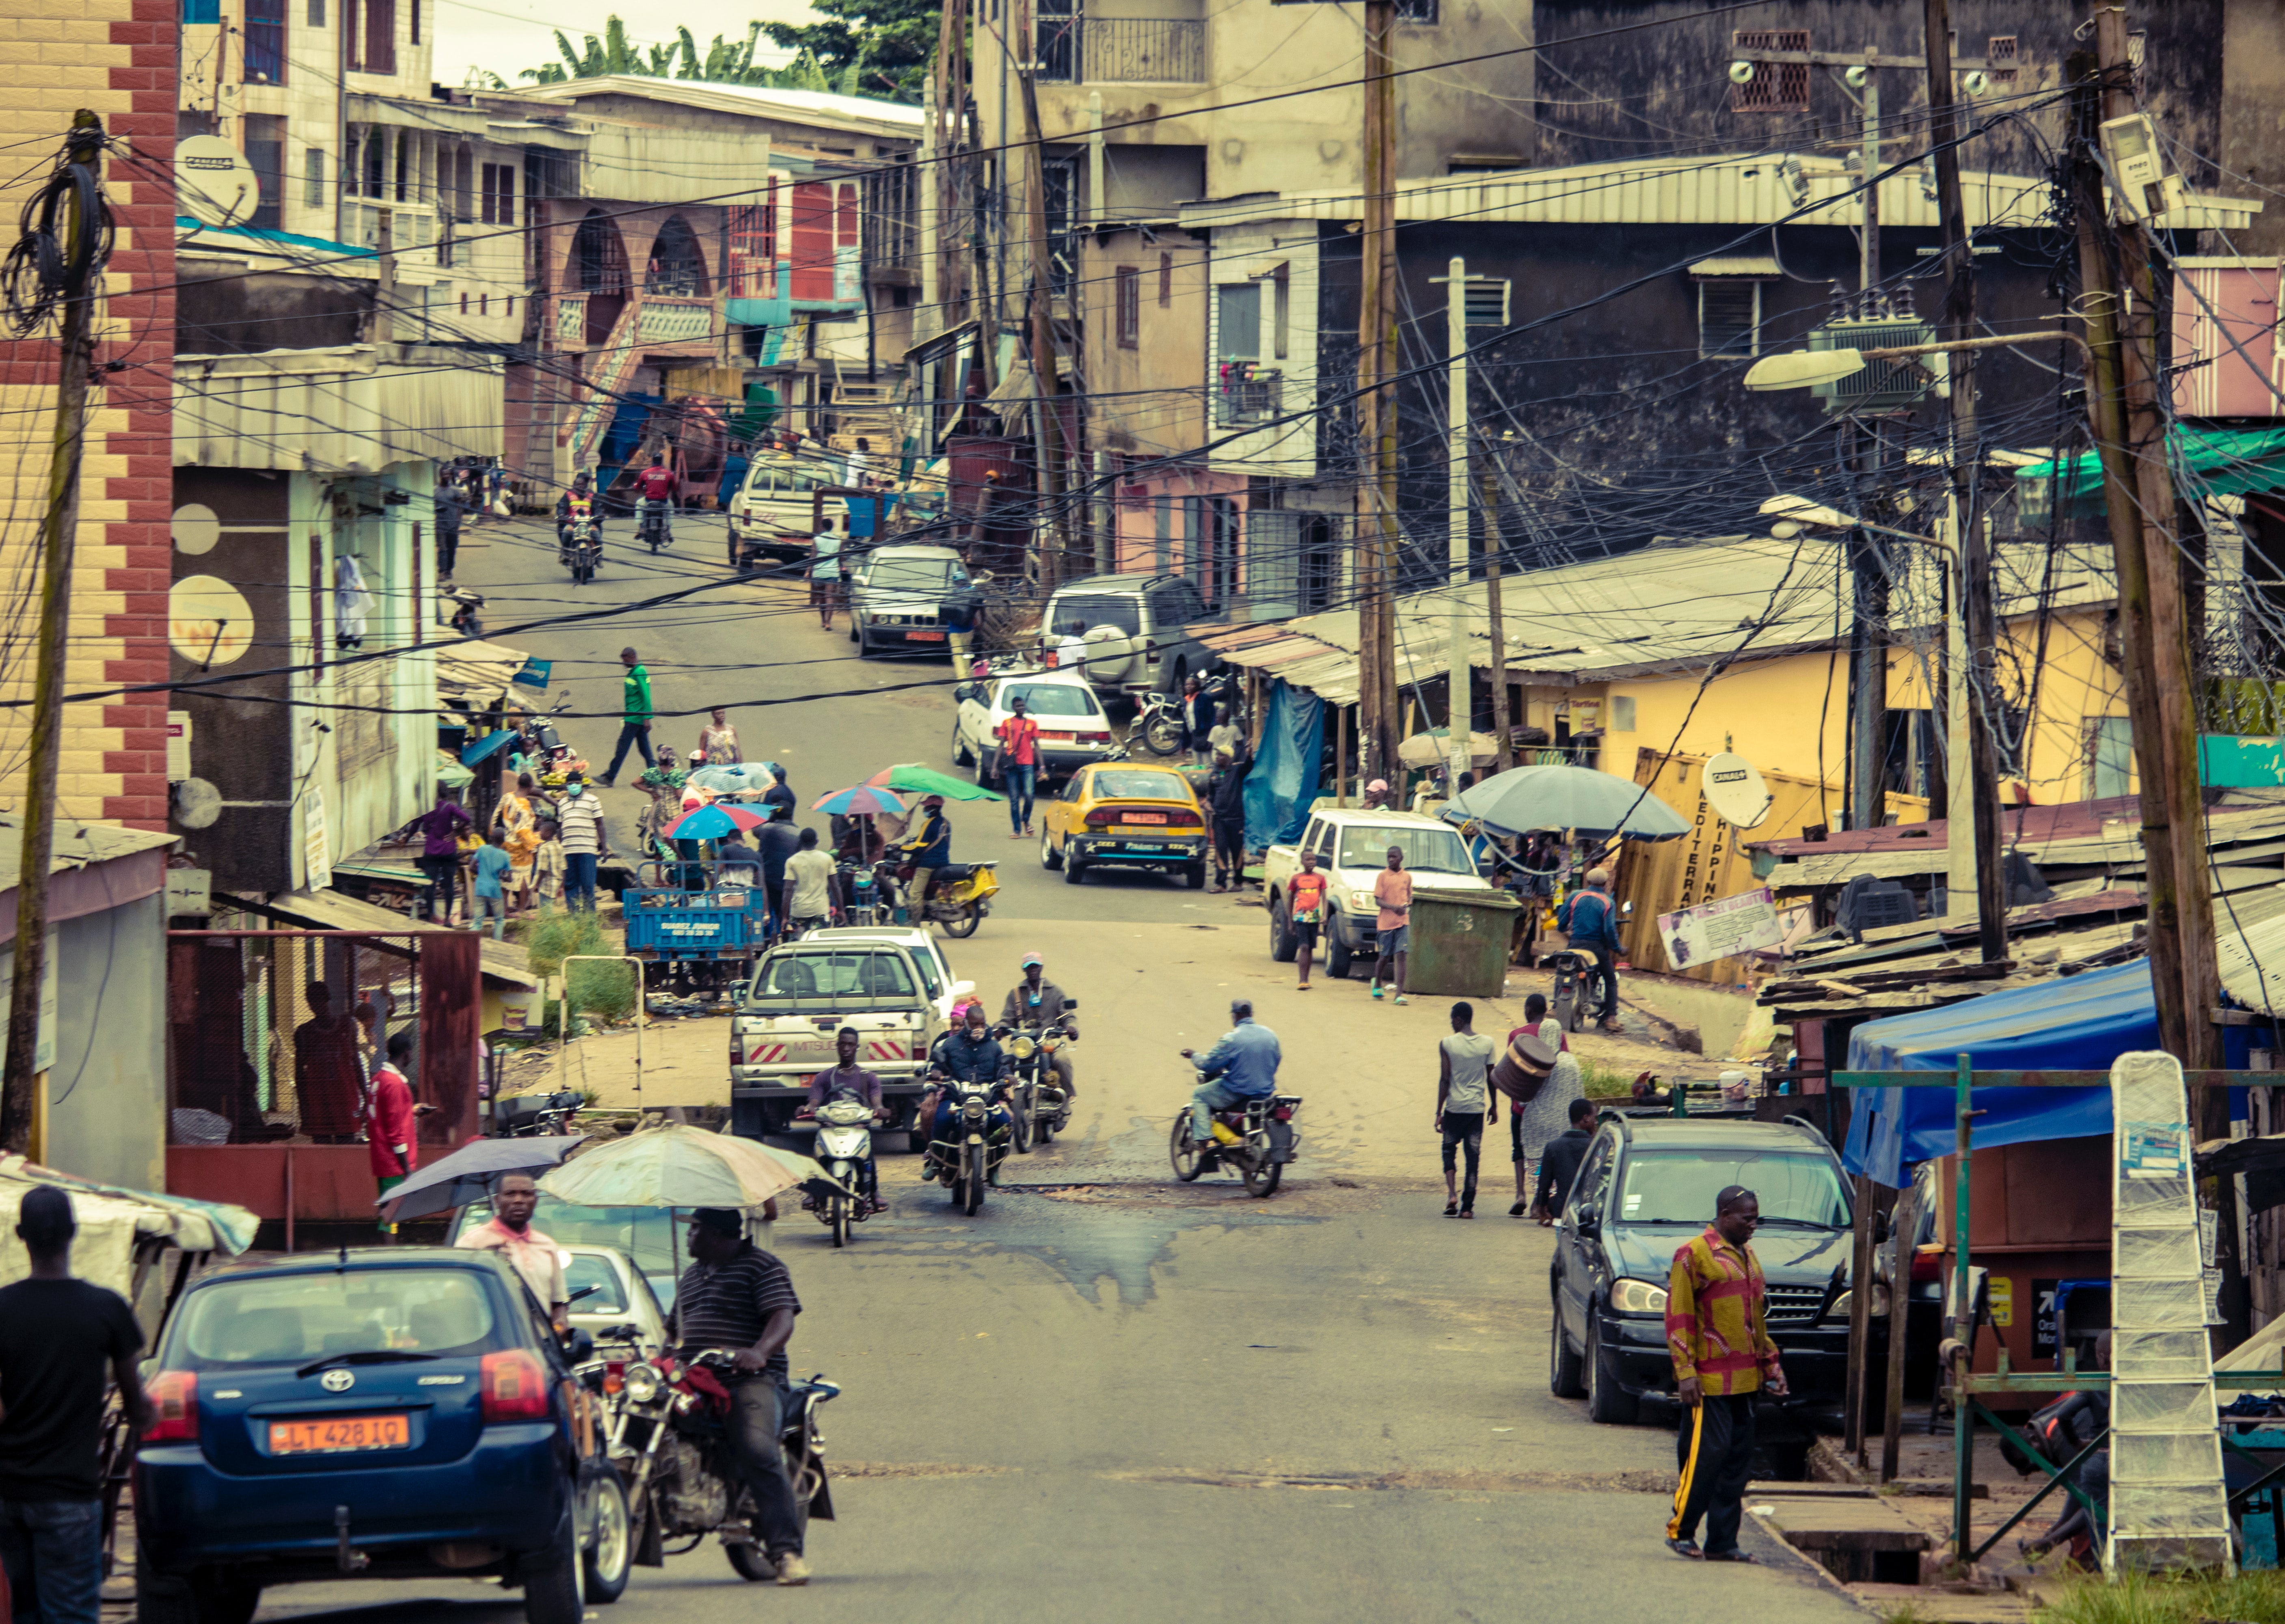 A busy street full of motorized vehicles in Cameroon